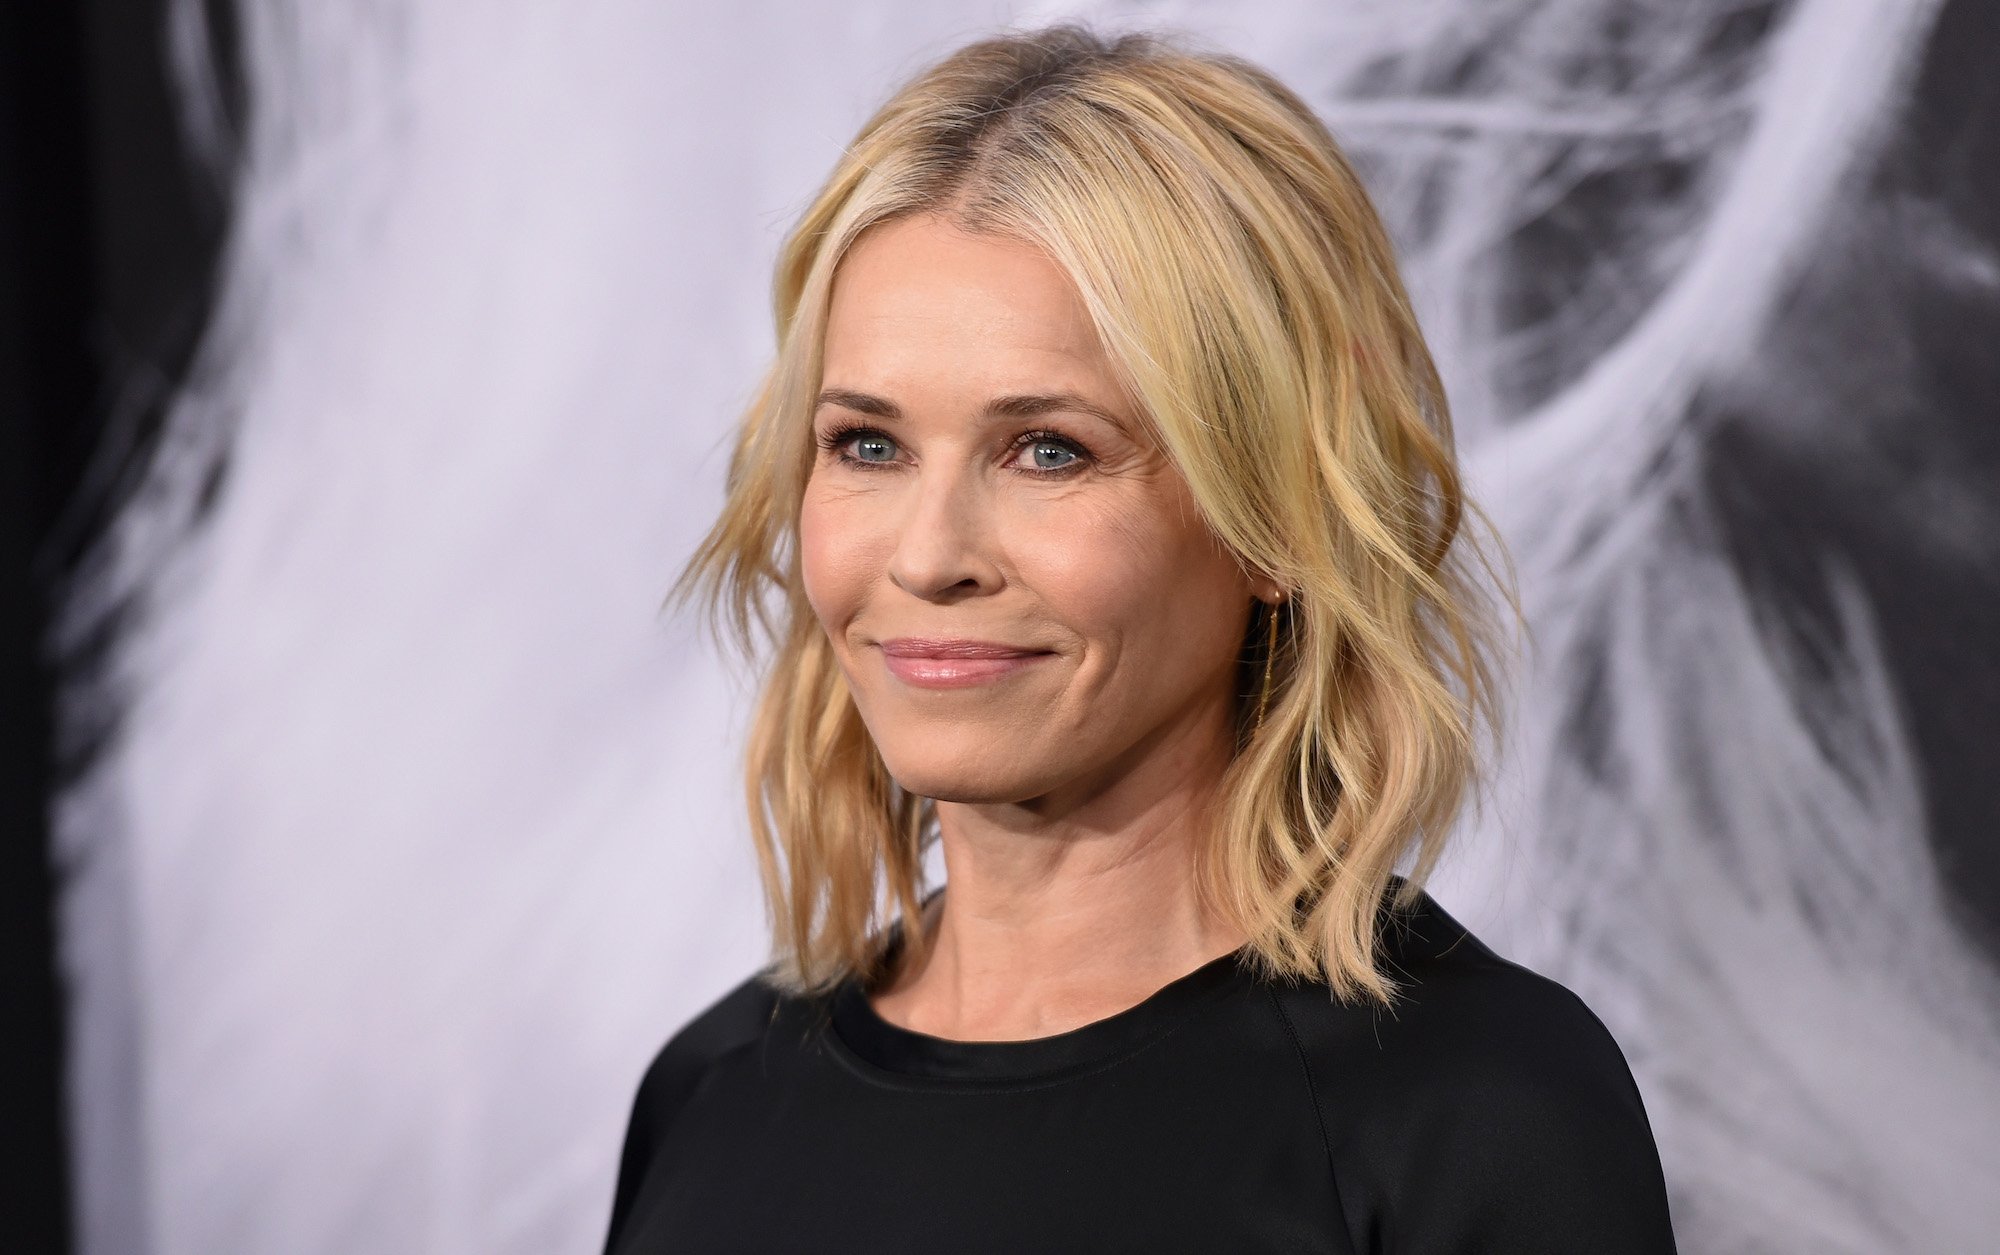 Chelsea Handler smiling in front of a blurred background